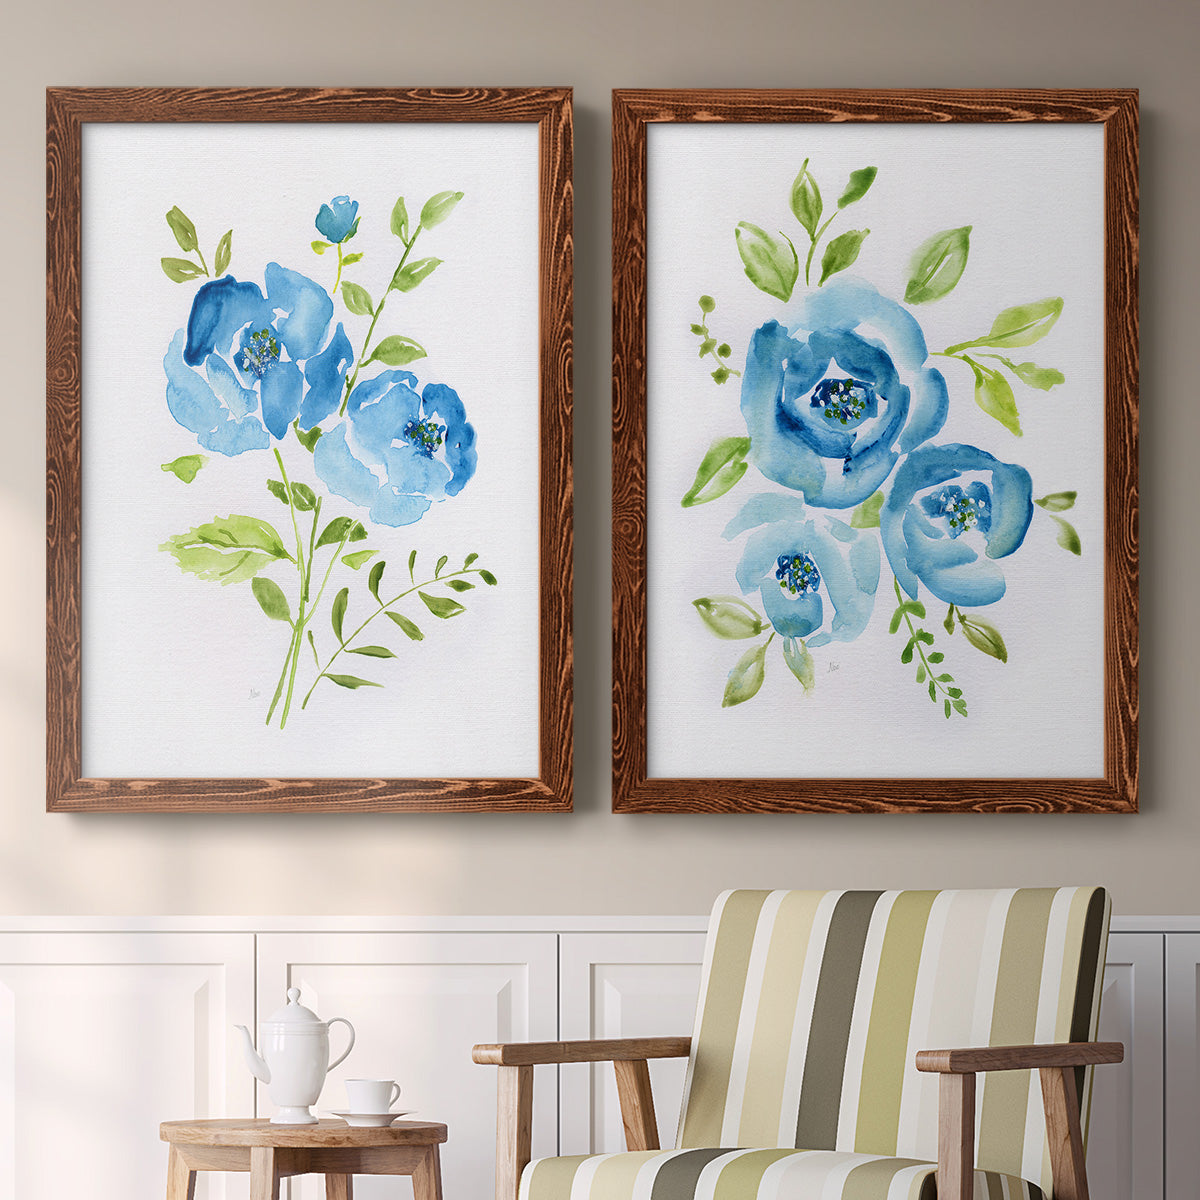 Blue Morning Bouquet I - Premium Framed Canvas 2 Piece Set - Ready to Hang